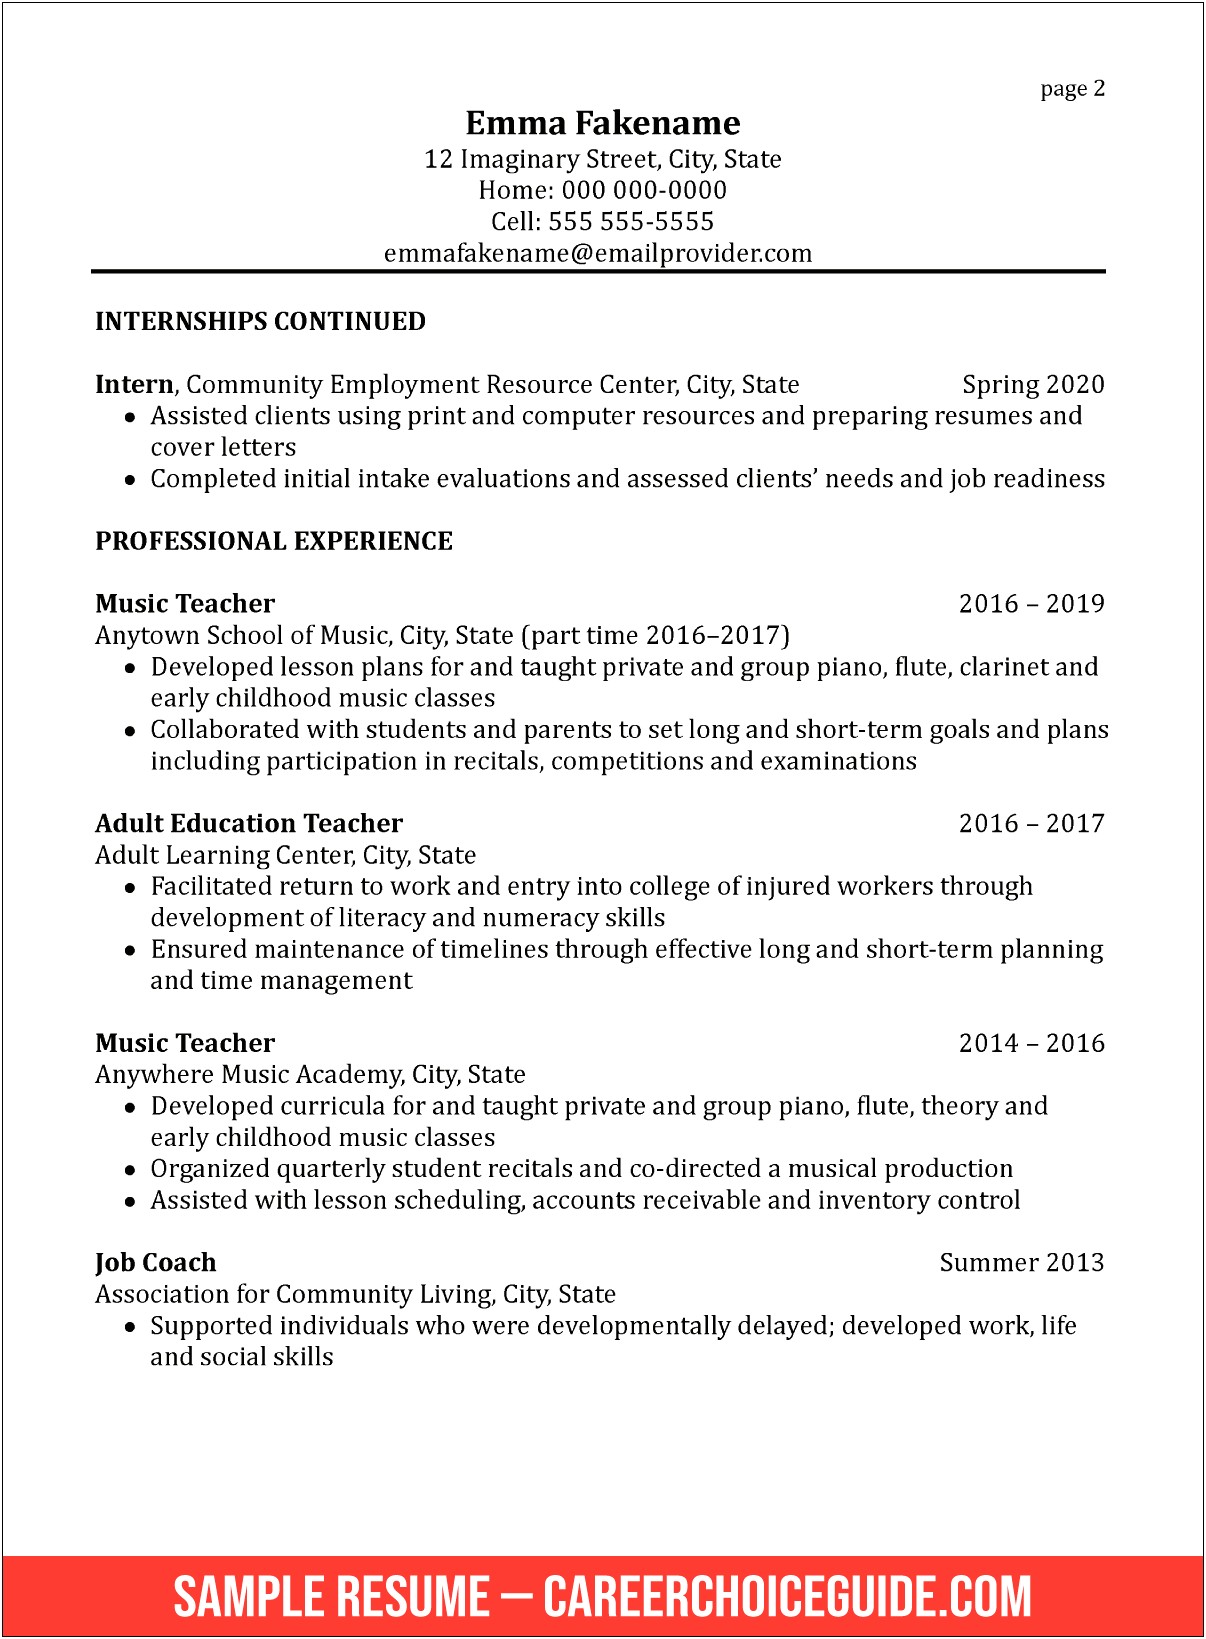 Resume Of A Preschool Teacher With Unrelated Experience